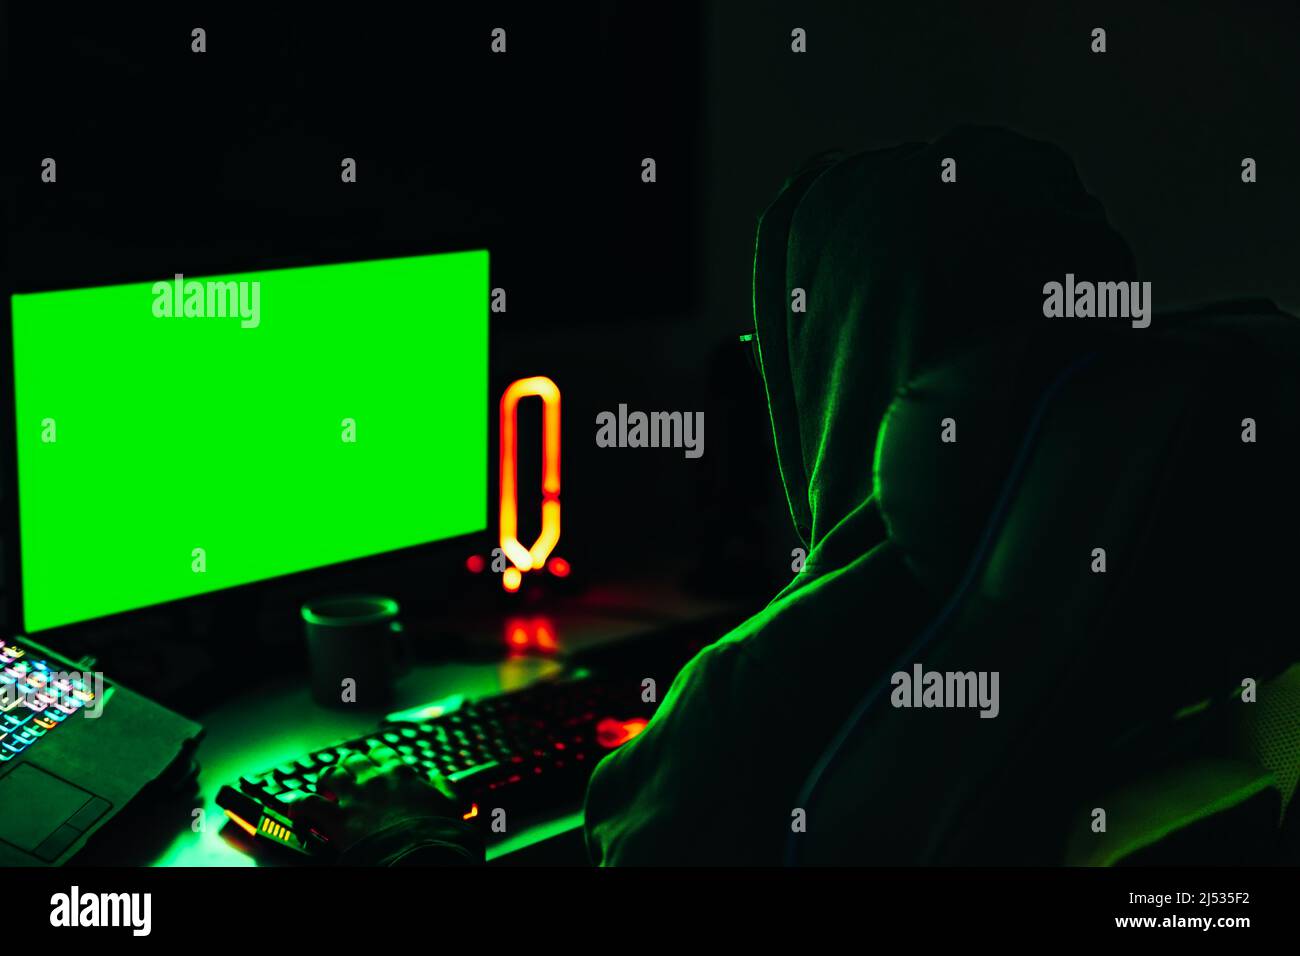 Hacker using computer to spy on financial data on government servers. cyber attack concept. Stock Photo